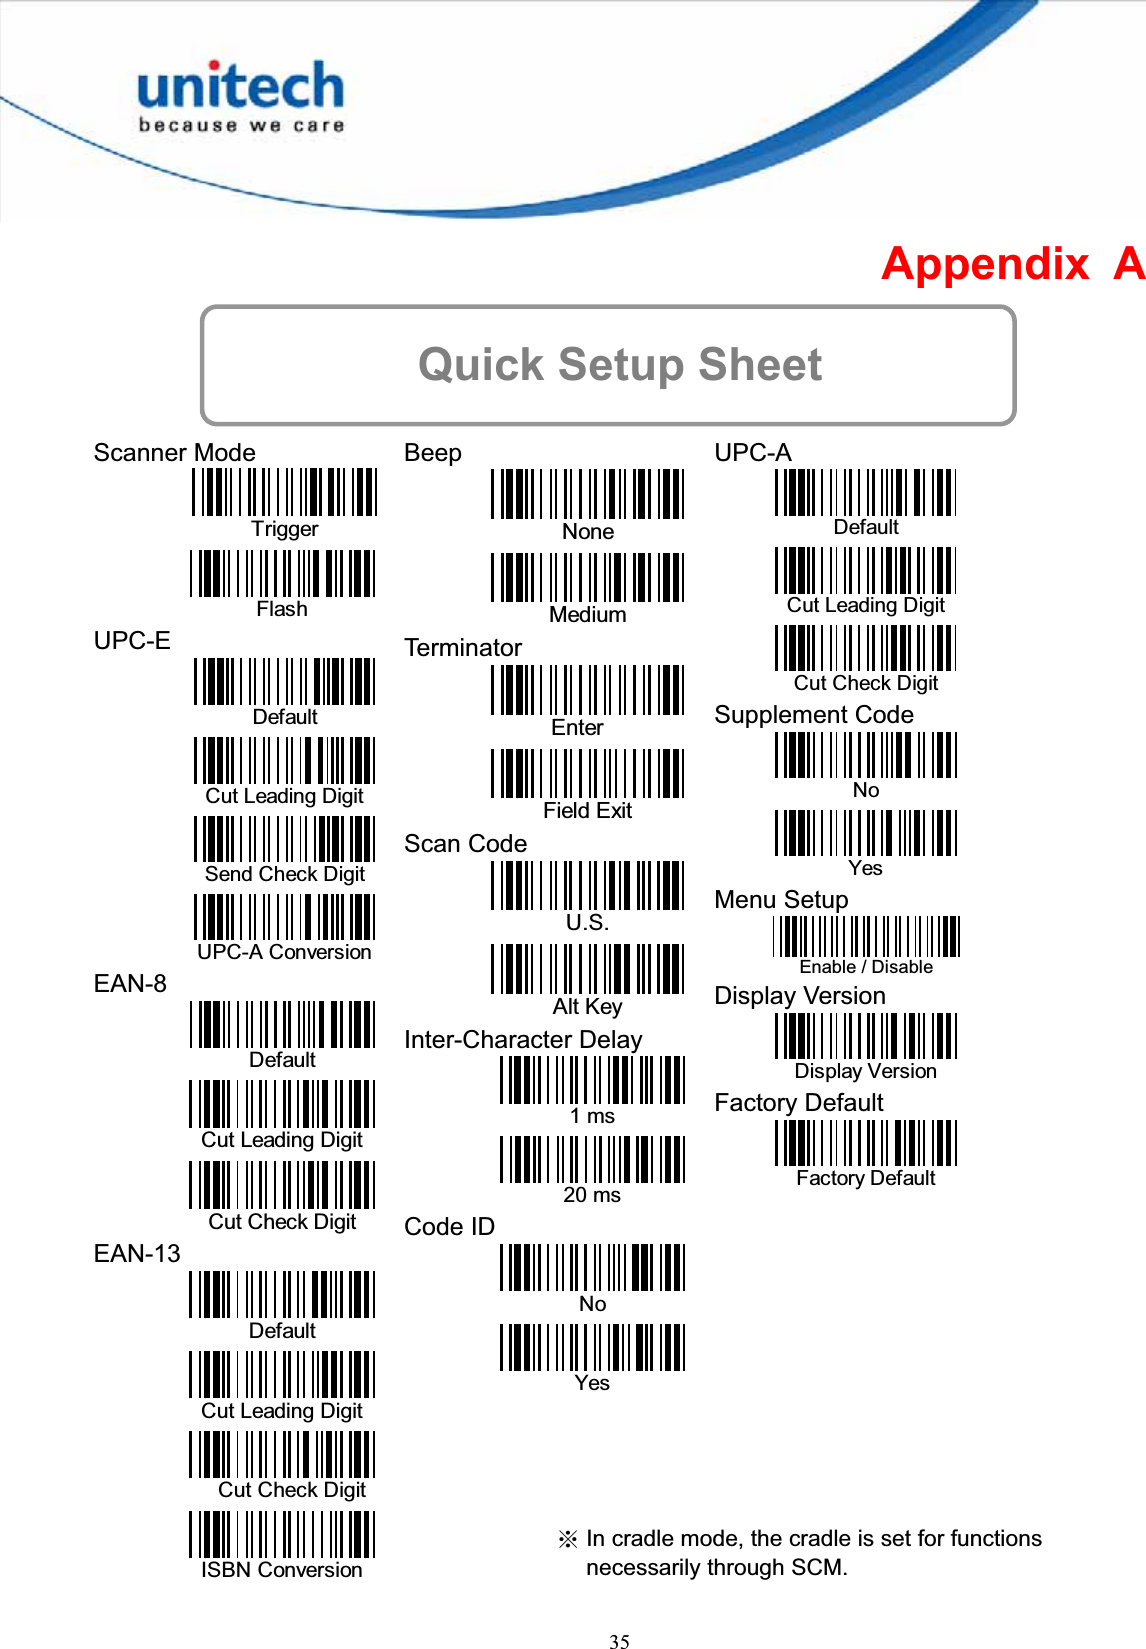 35Appendix A Quick Setup Sheet Scanner Mode Trigger Flash UPC-EDefault Cut Leading Digit Send Check Digit UPC-A Conversion EAN-8Default Cut Leading Digit Cut Check Digit EAN-13Default Cut Leading Digit Cut Check Digit ISBN Conversion BeepNoneMediumTerminator EnterField ExitScan Code U.S.Alt KeyInter-Character Delay 1 ms20 msCode ID NoYesUPC-ADefaultCut Leading Digit Cut Check Digit Supplement Code No Yes Menu Setup Enable / Disable Display Version Display Version Factory Default Factory Default ϡ In cradle mode, the cradle is set for functions necessarily through SCM. 